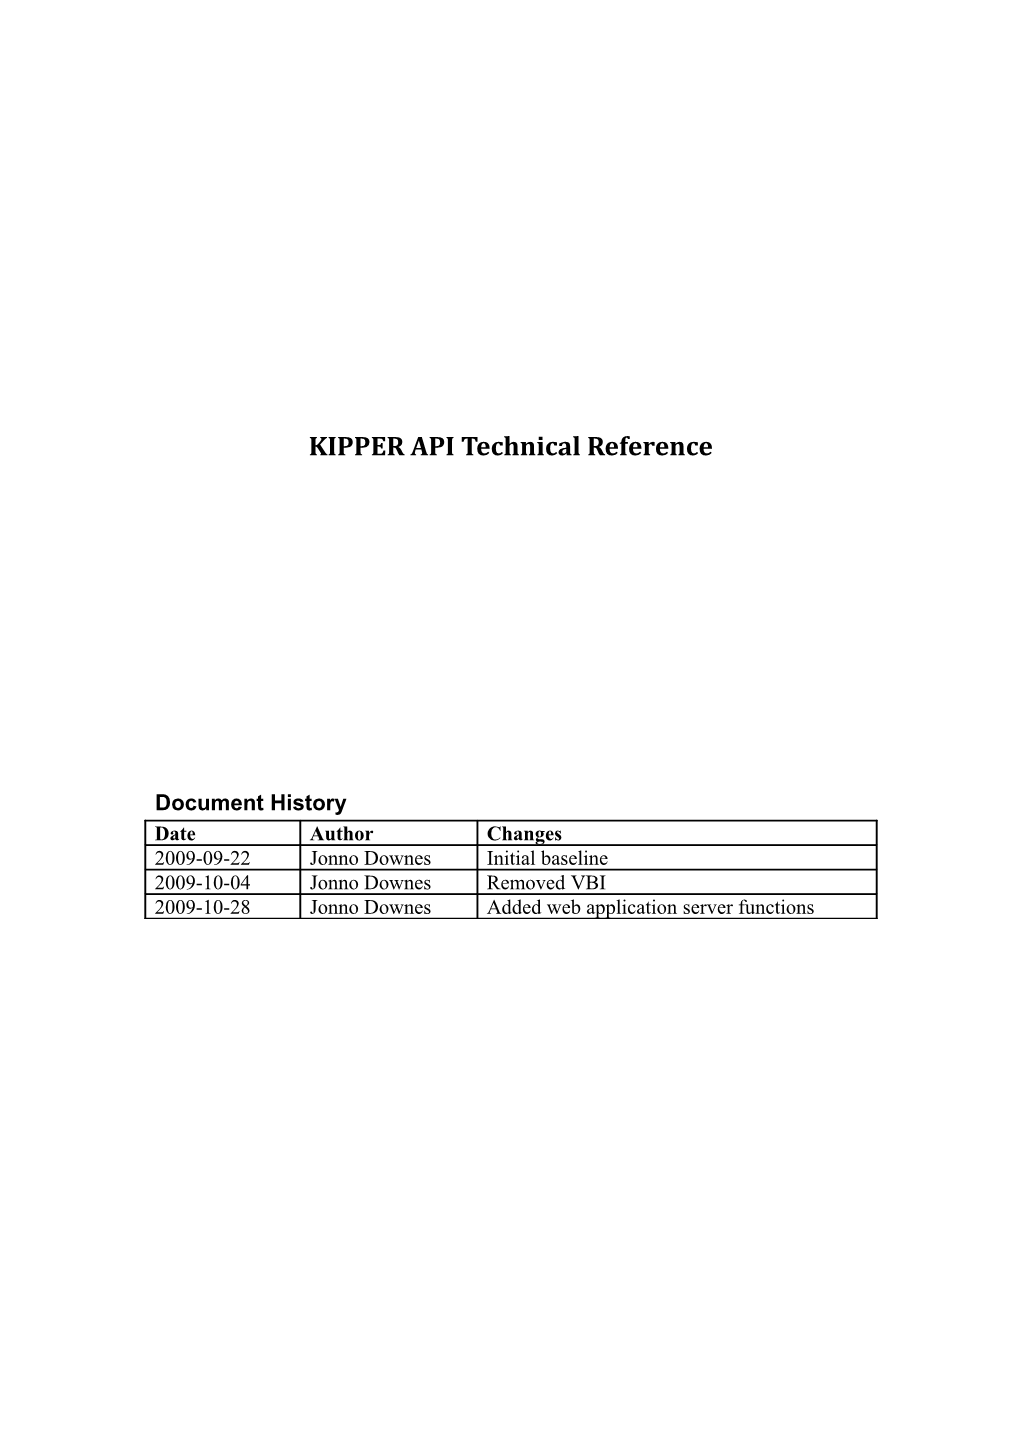 KIPPERAPI Technical Reference